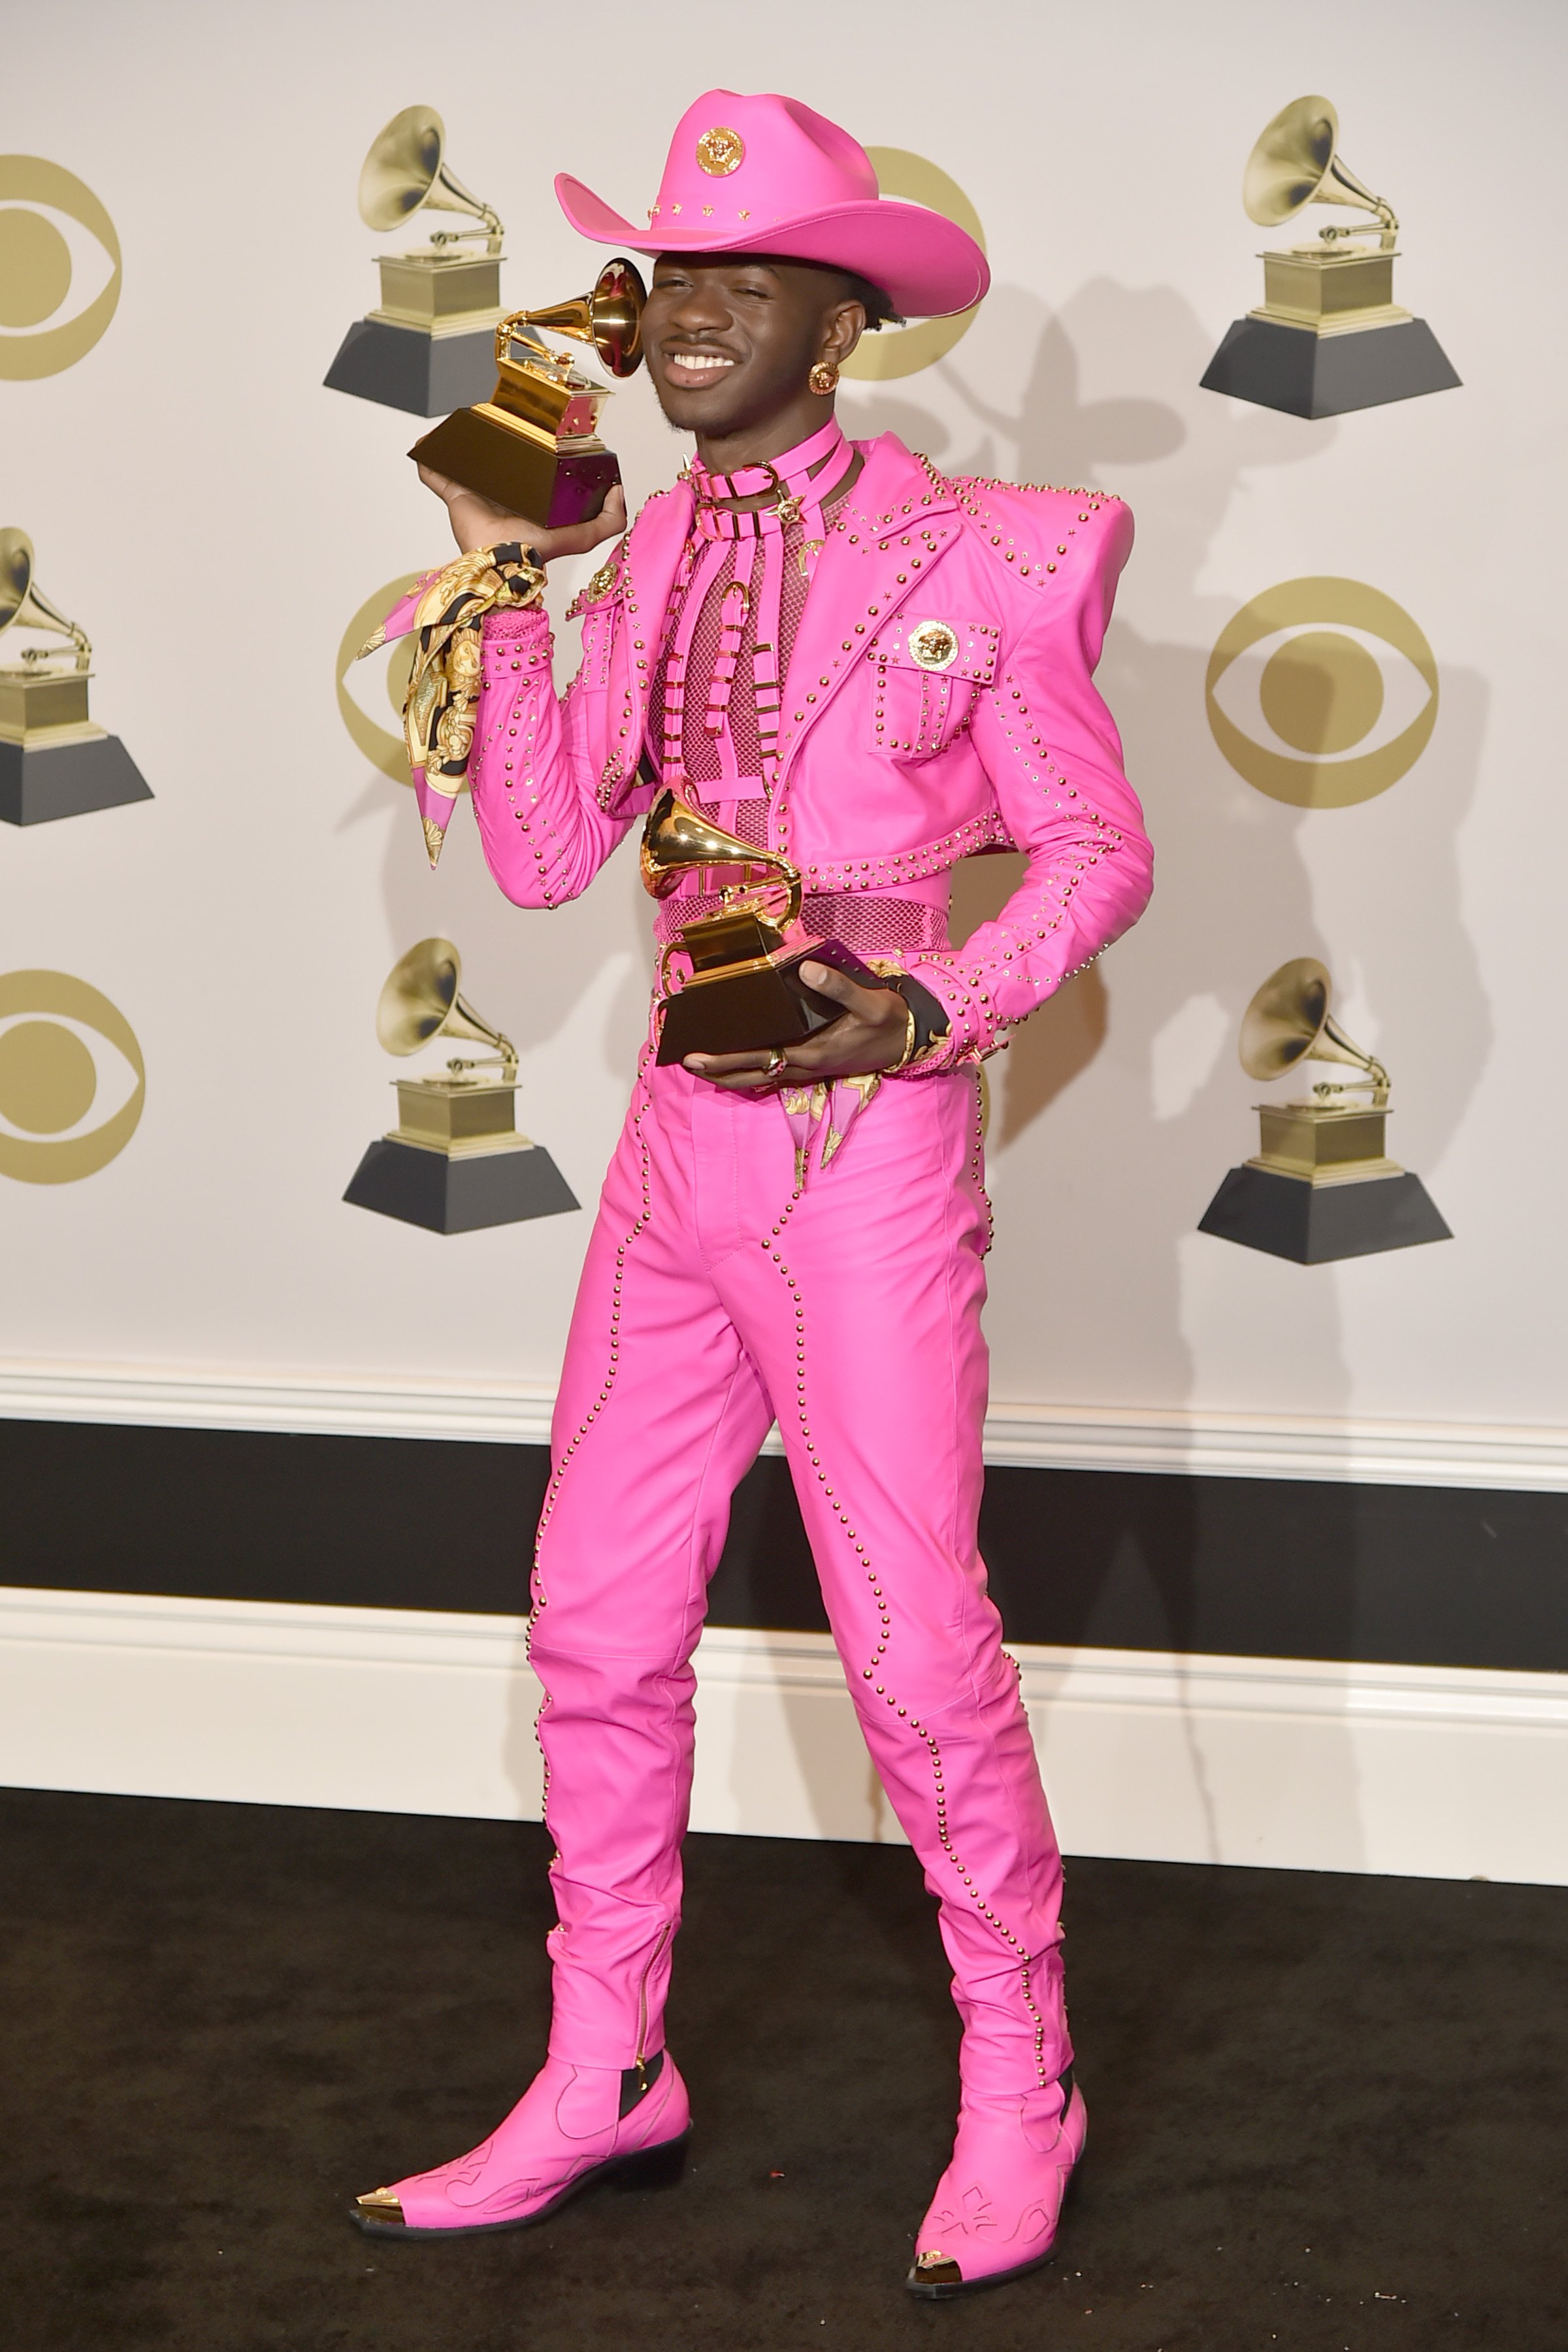 Stylist Comments on Grammys 2020 Male Outfits, Calling the Ceremony